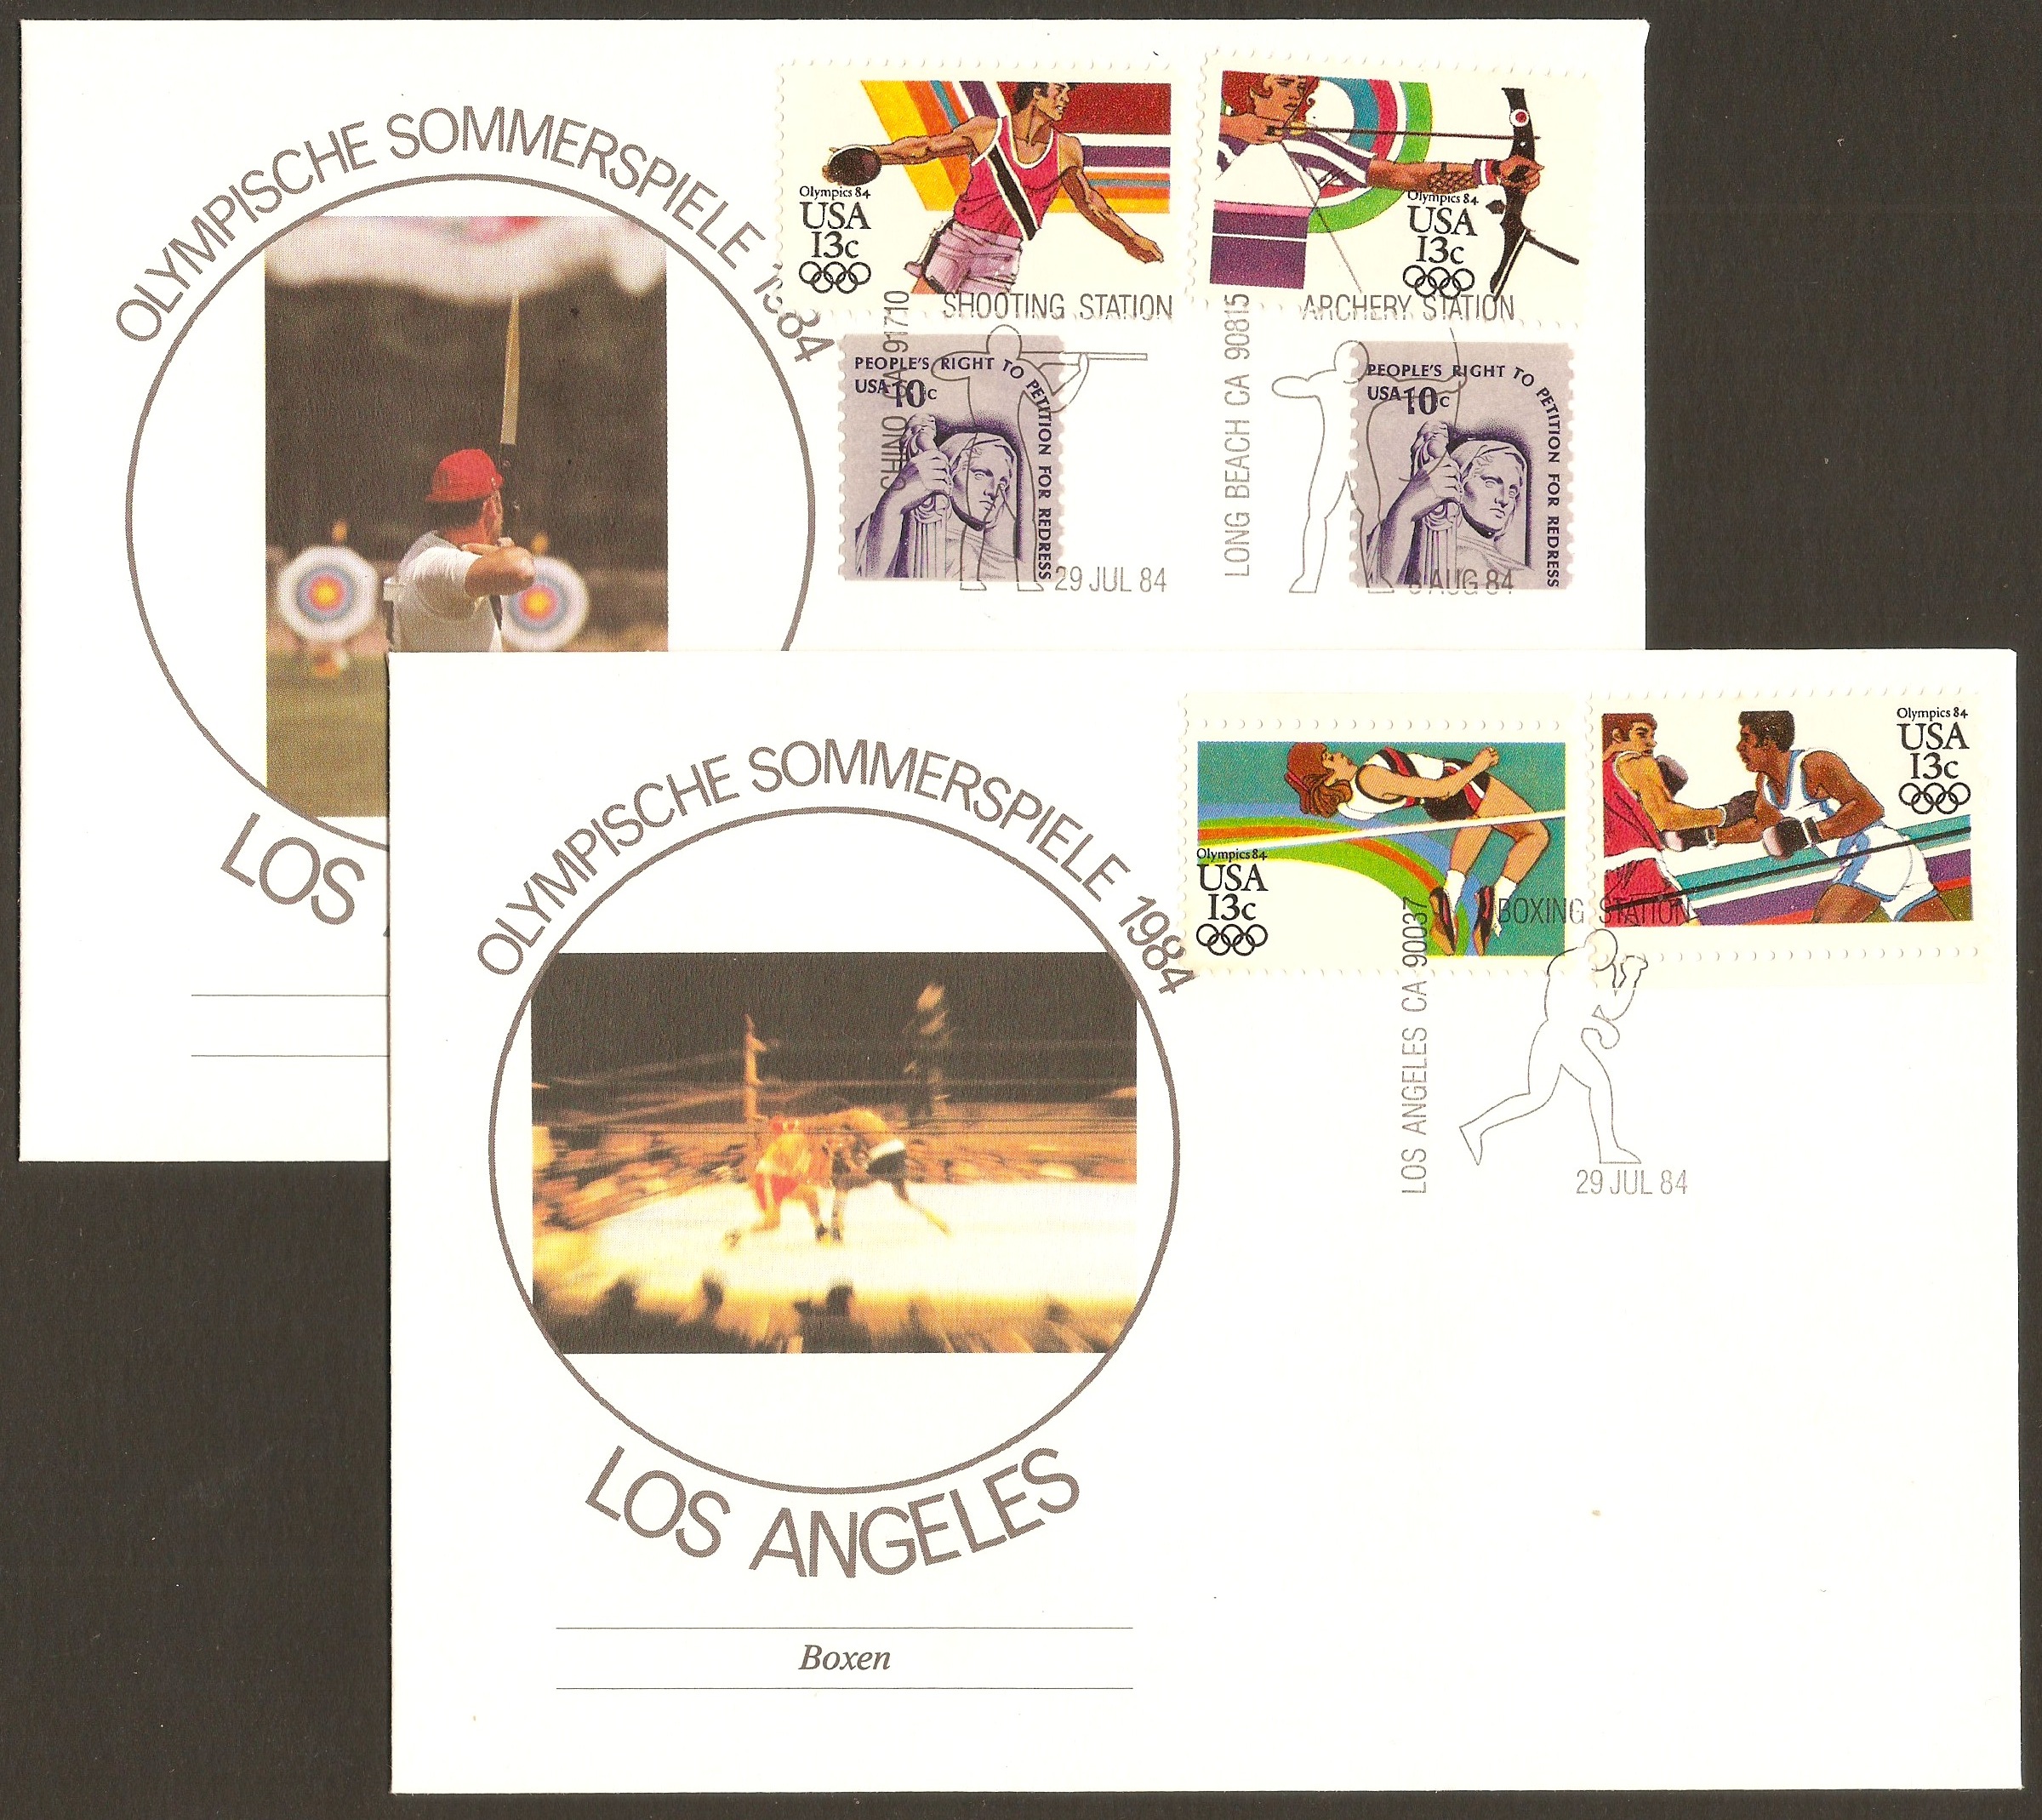 United States 1983 Los Angeles Olympics Souvenir Cover.